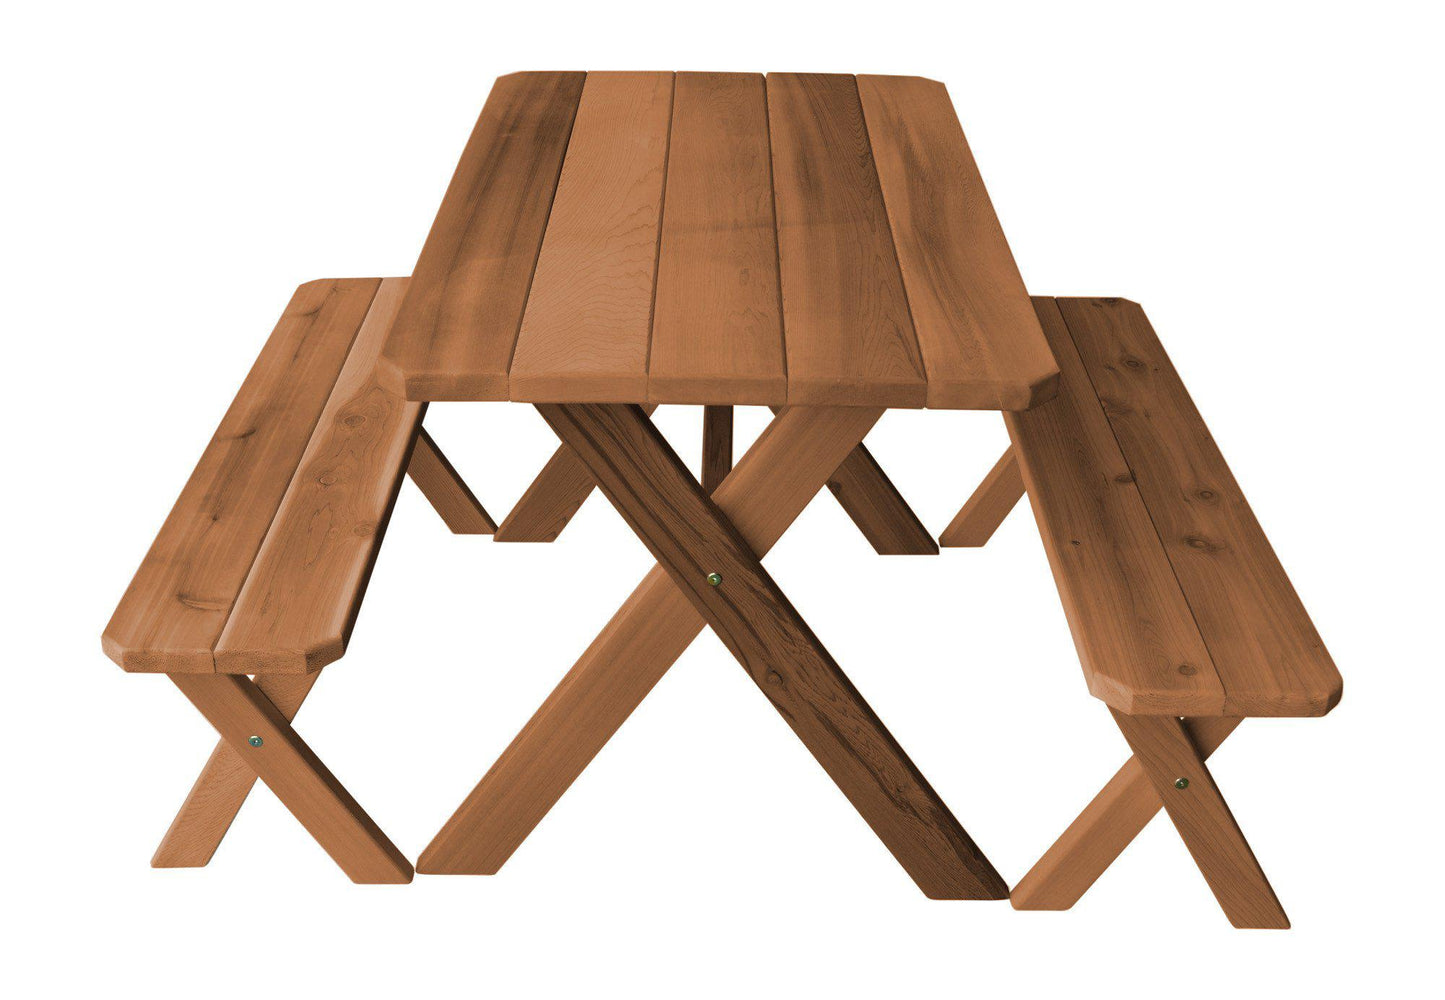 Regallion Outdoor Western Red Cedar 4' Cross-leg Table w/2 Benches - LEAD TIME TO SHIP 2 WEEKS